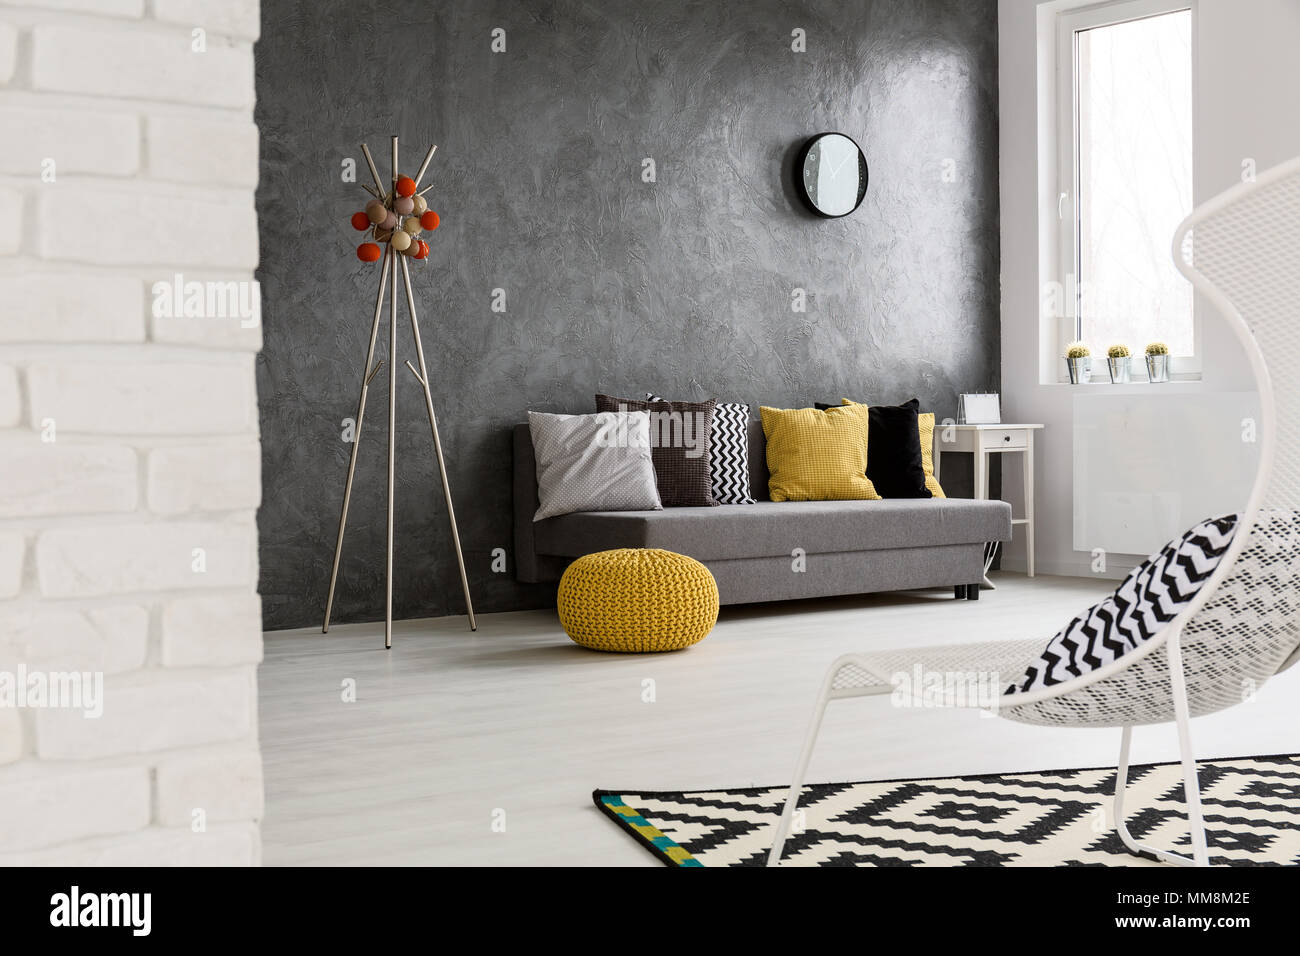 Modern, grey interior with sofa, chair, yellow details and stylish decorations Stock Photo